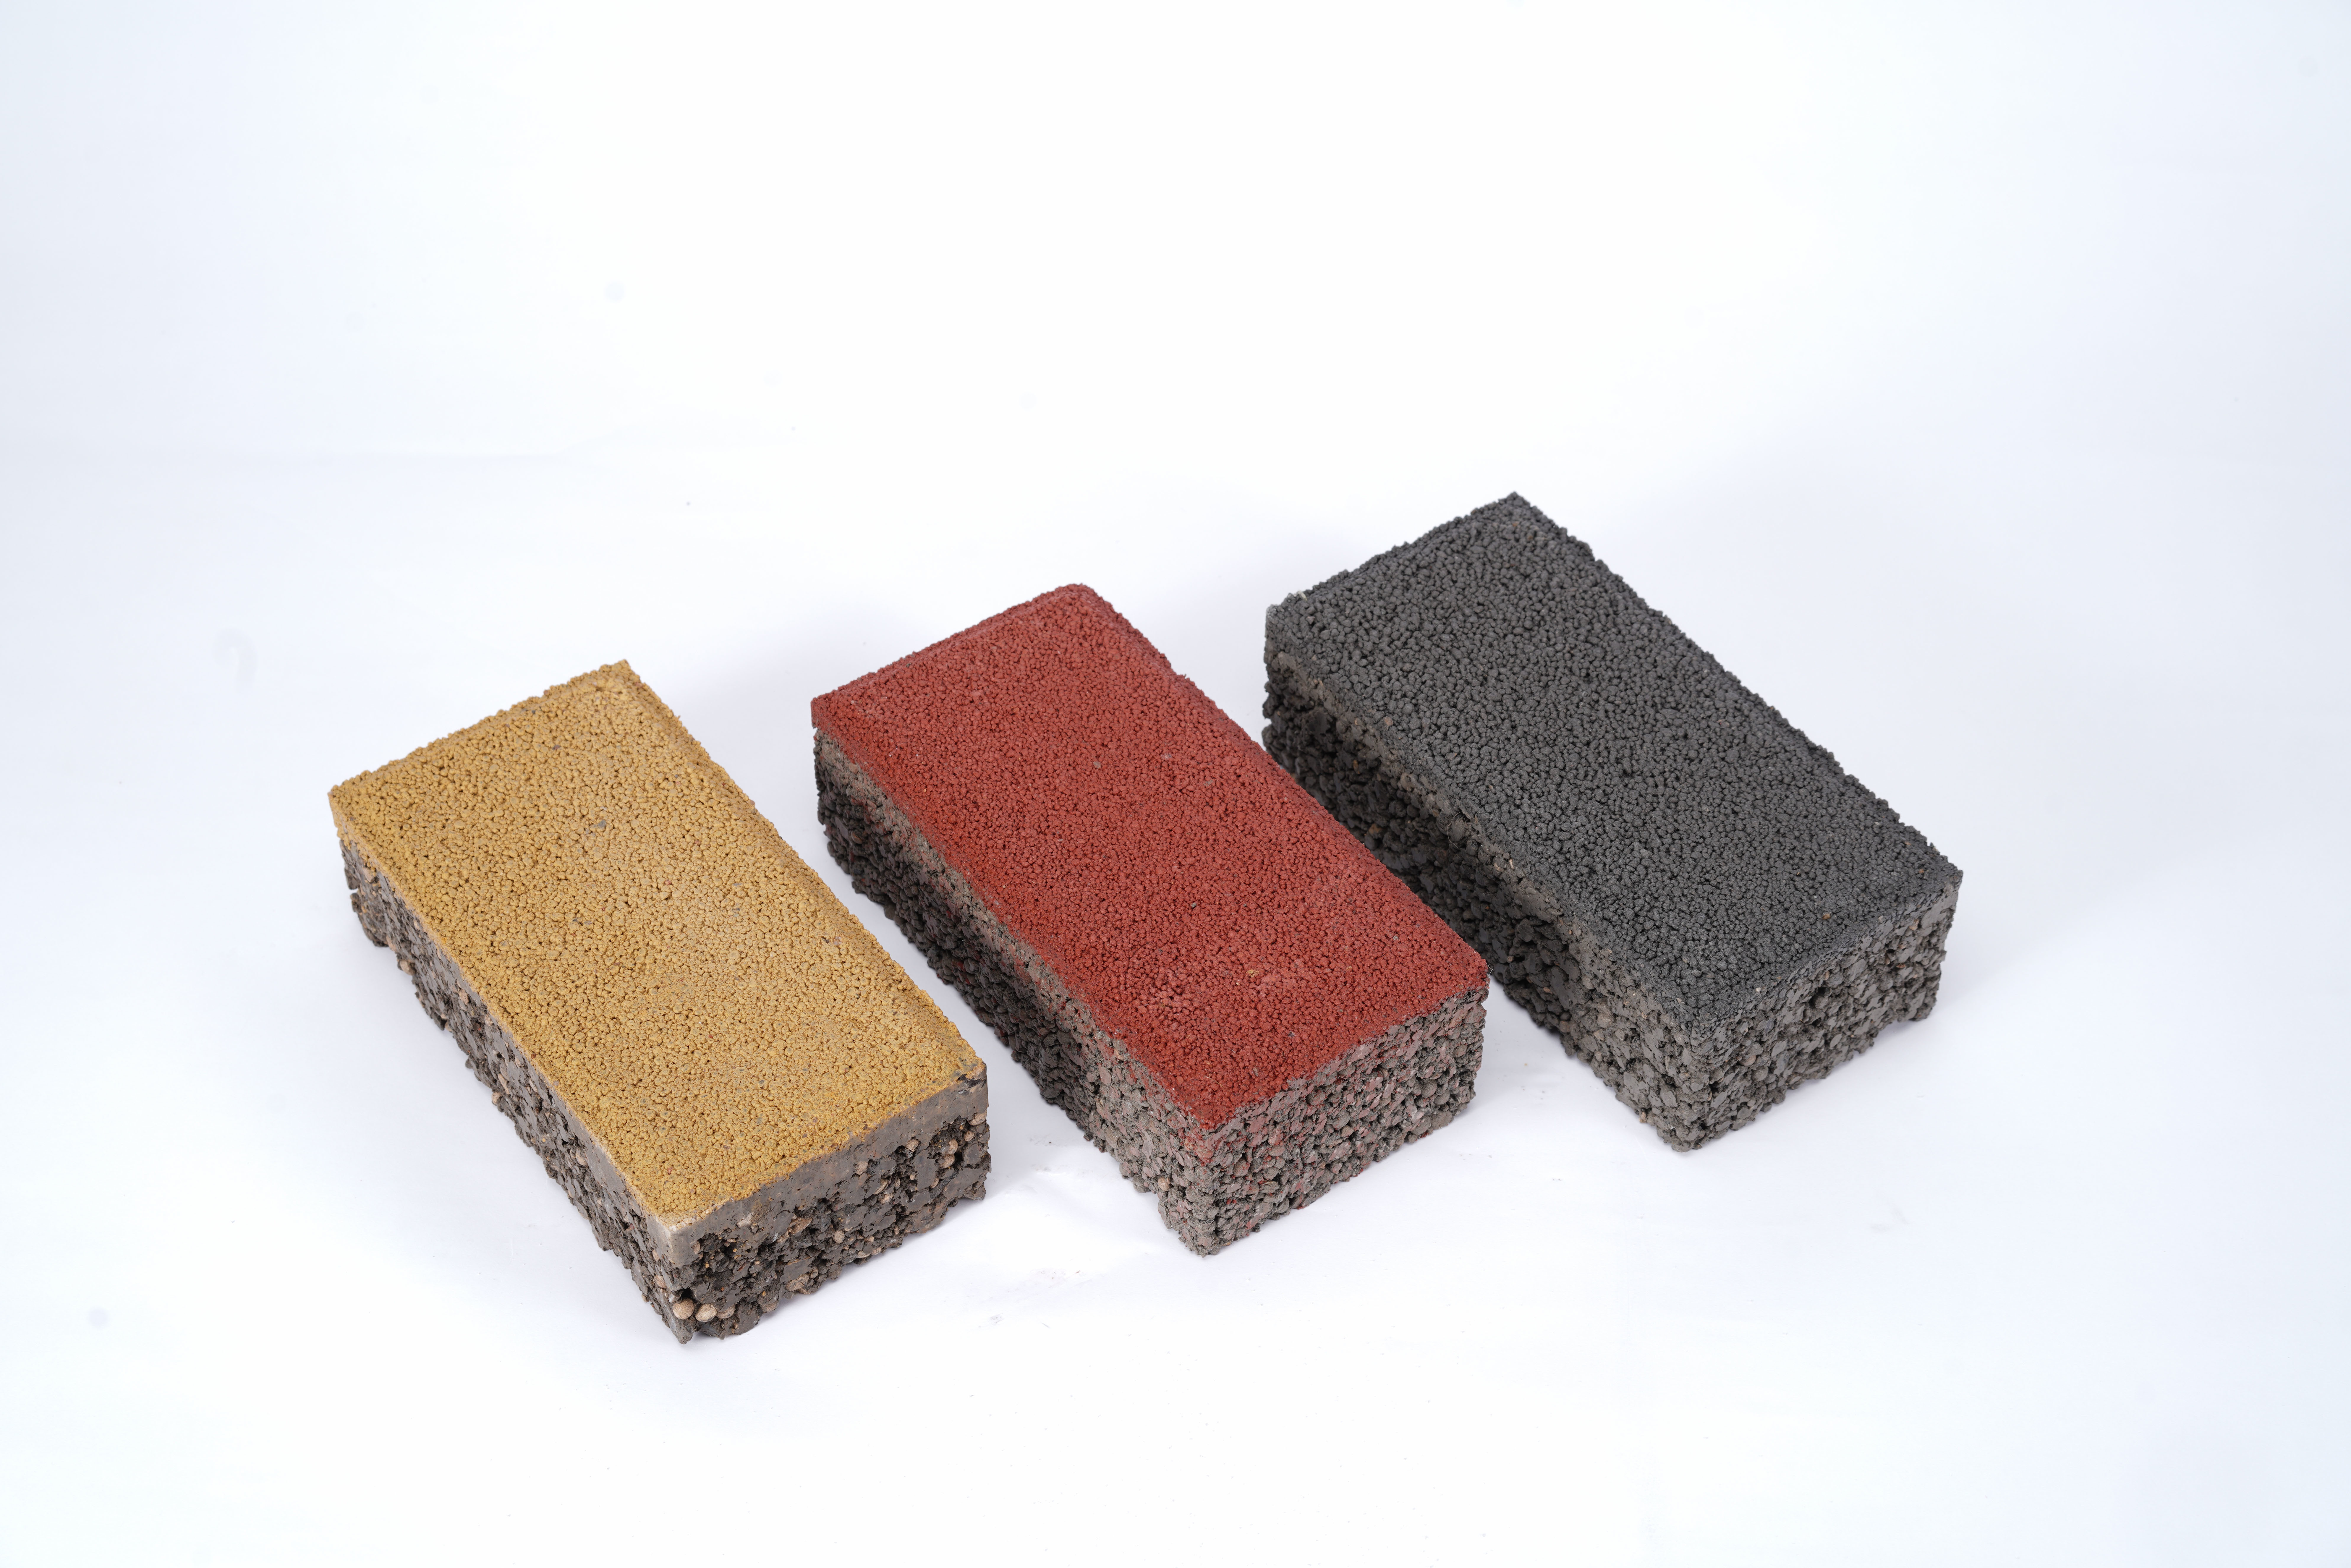 Ecological permeable materials